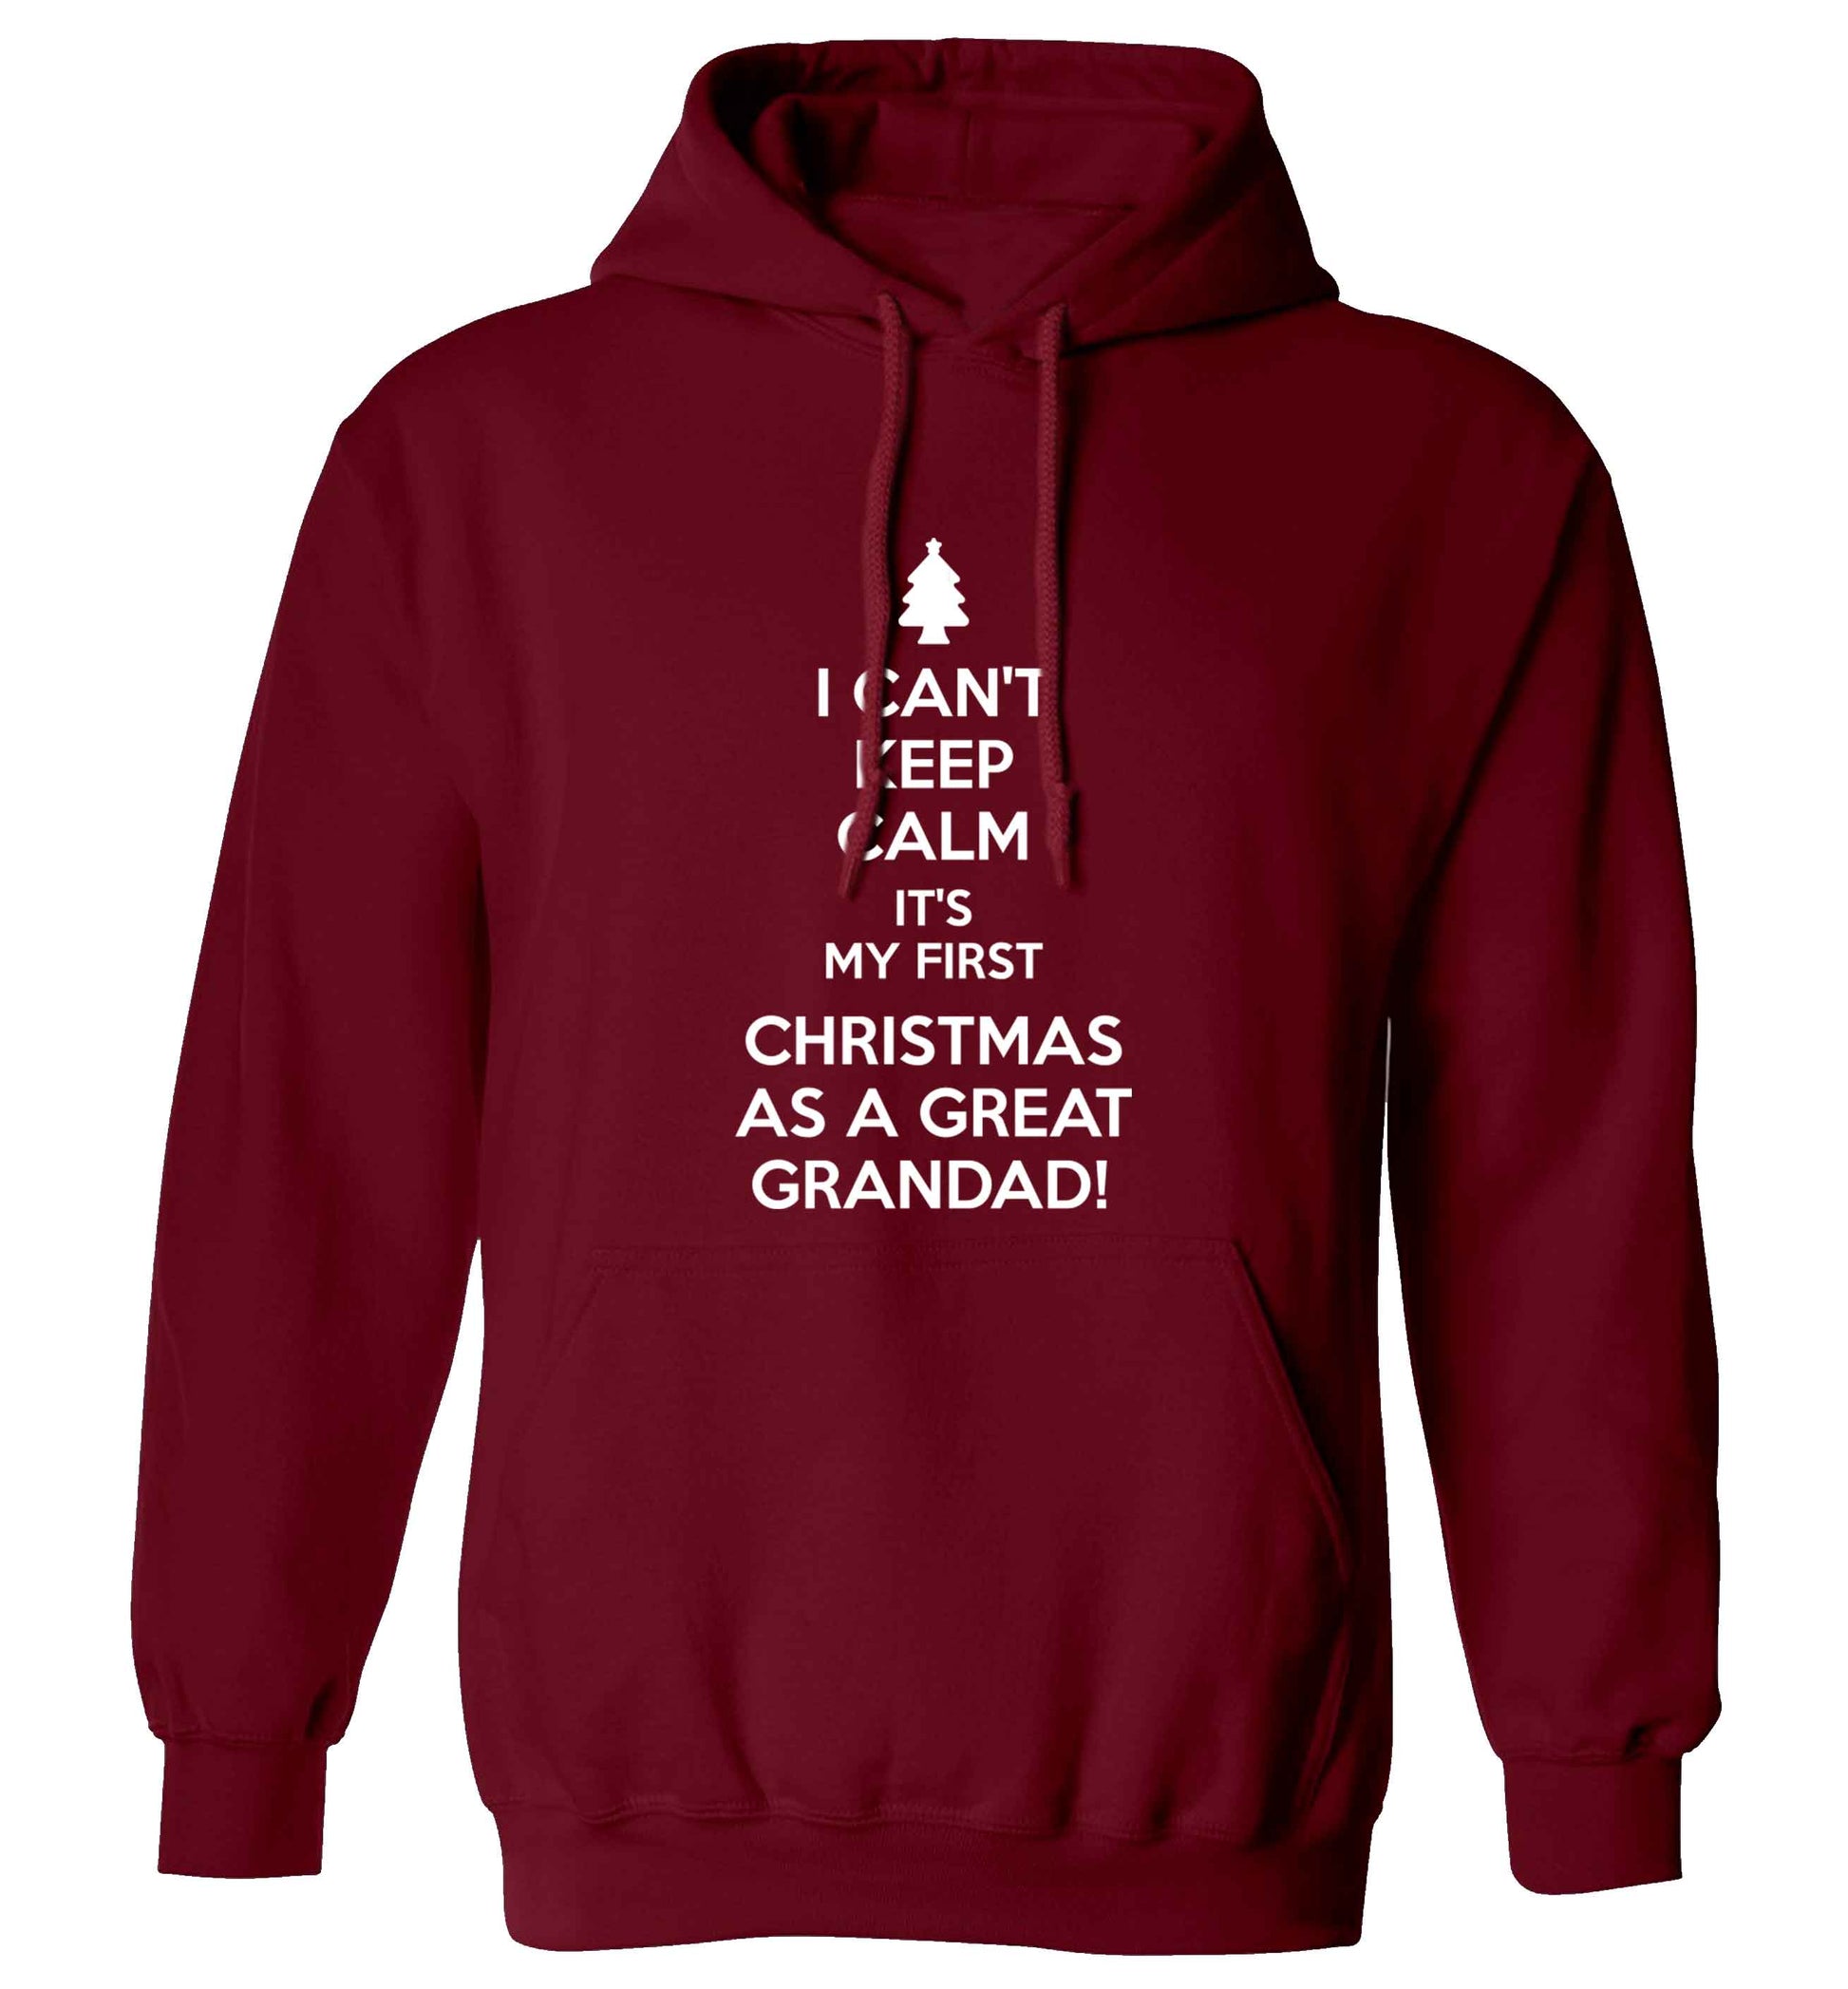 I can't keep calm it's my first Christmas as a great grandad! adults unisex maroon hoodie 2XL